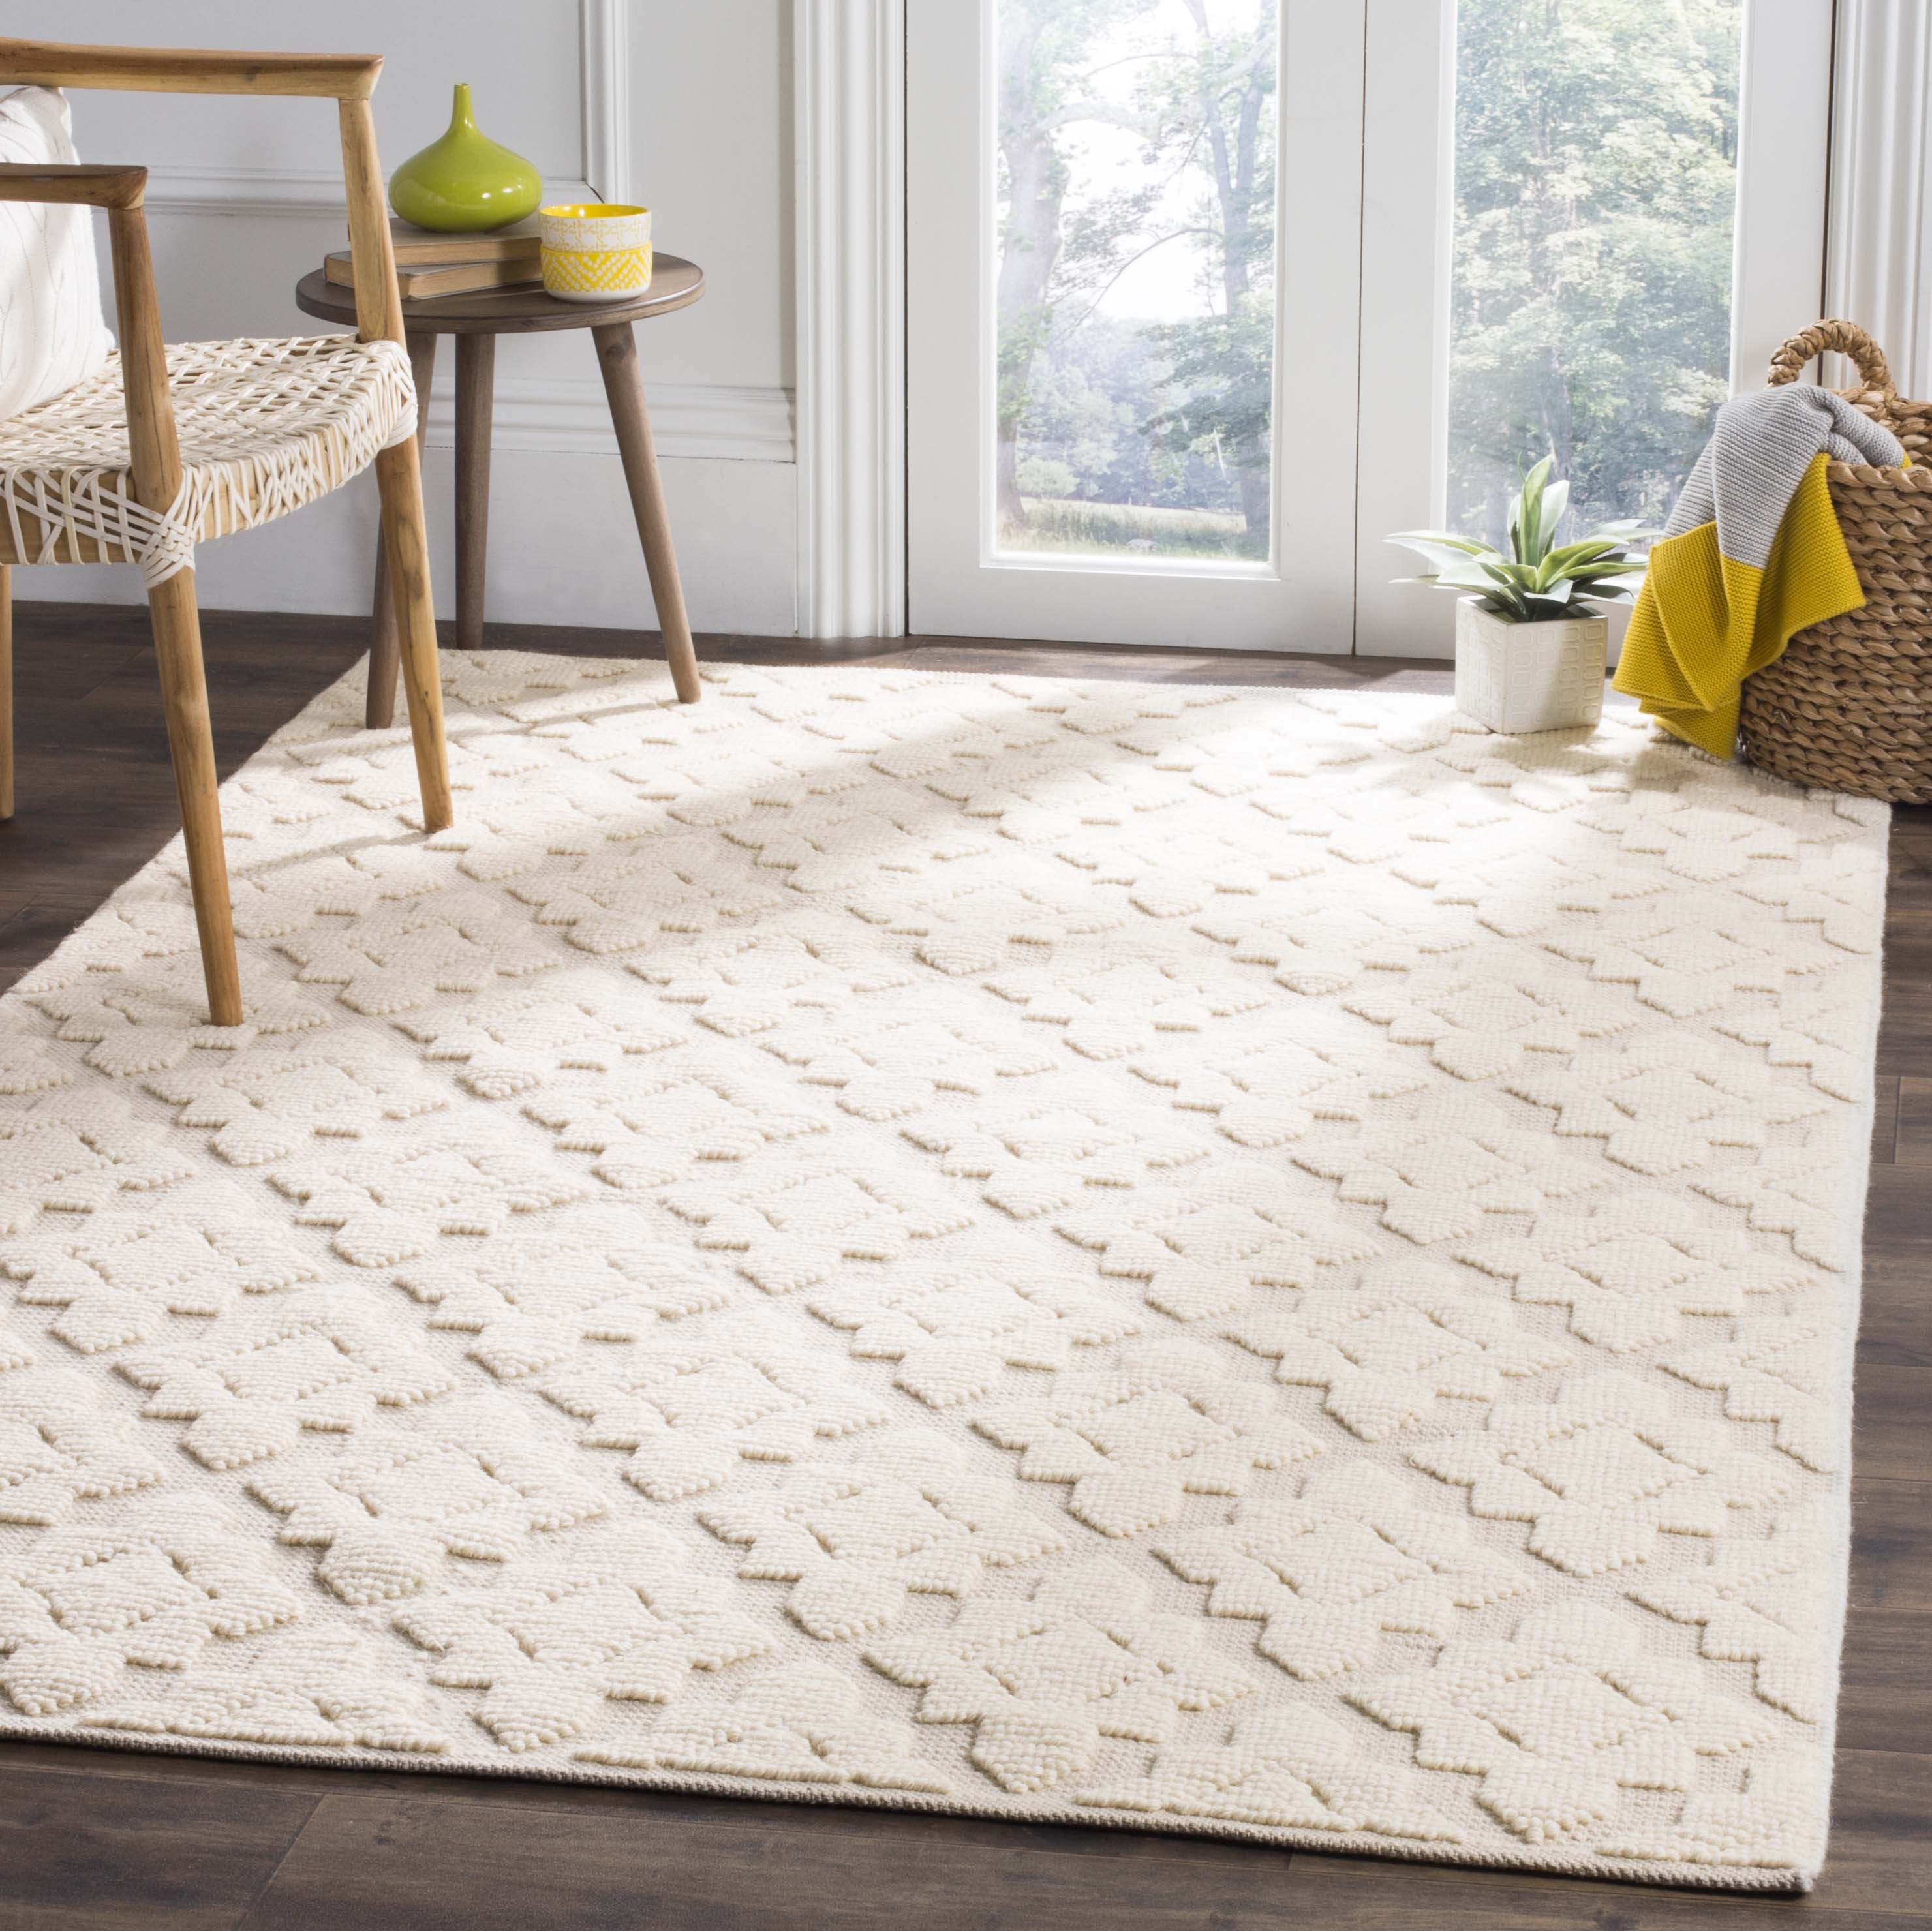 Arlo Home Hand Woven Area Rug, VRM103A, Ivory,  8' X 10' - Image 1